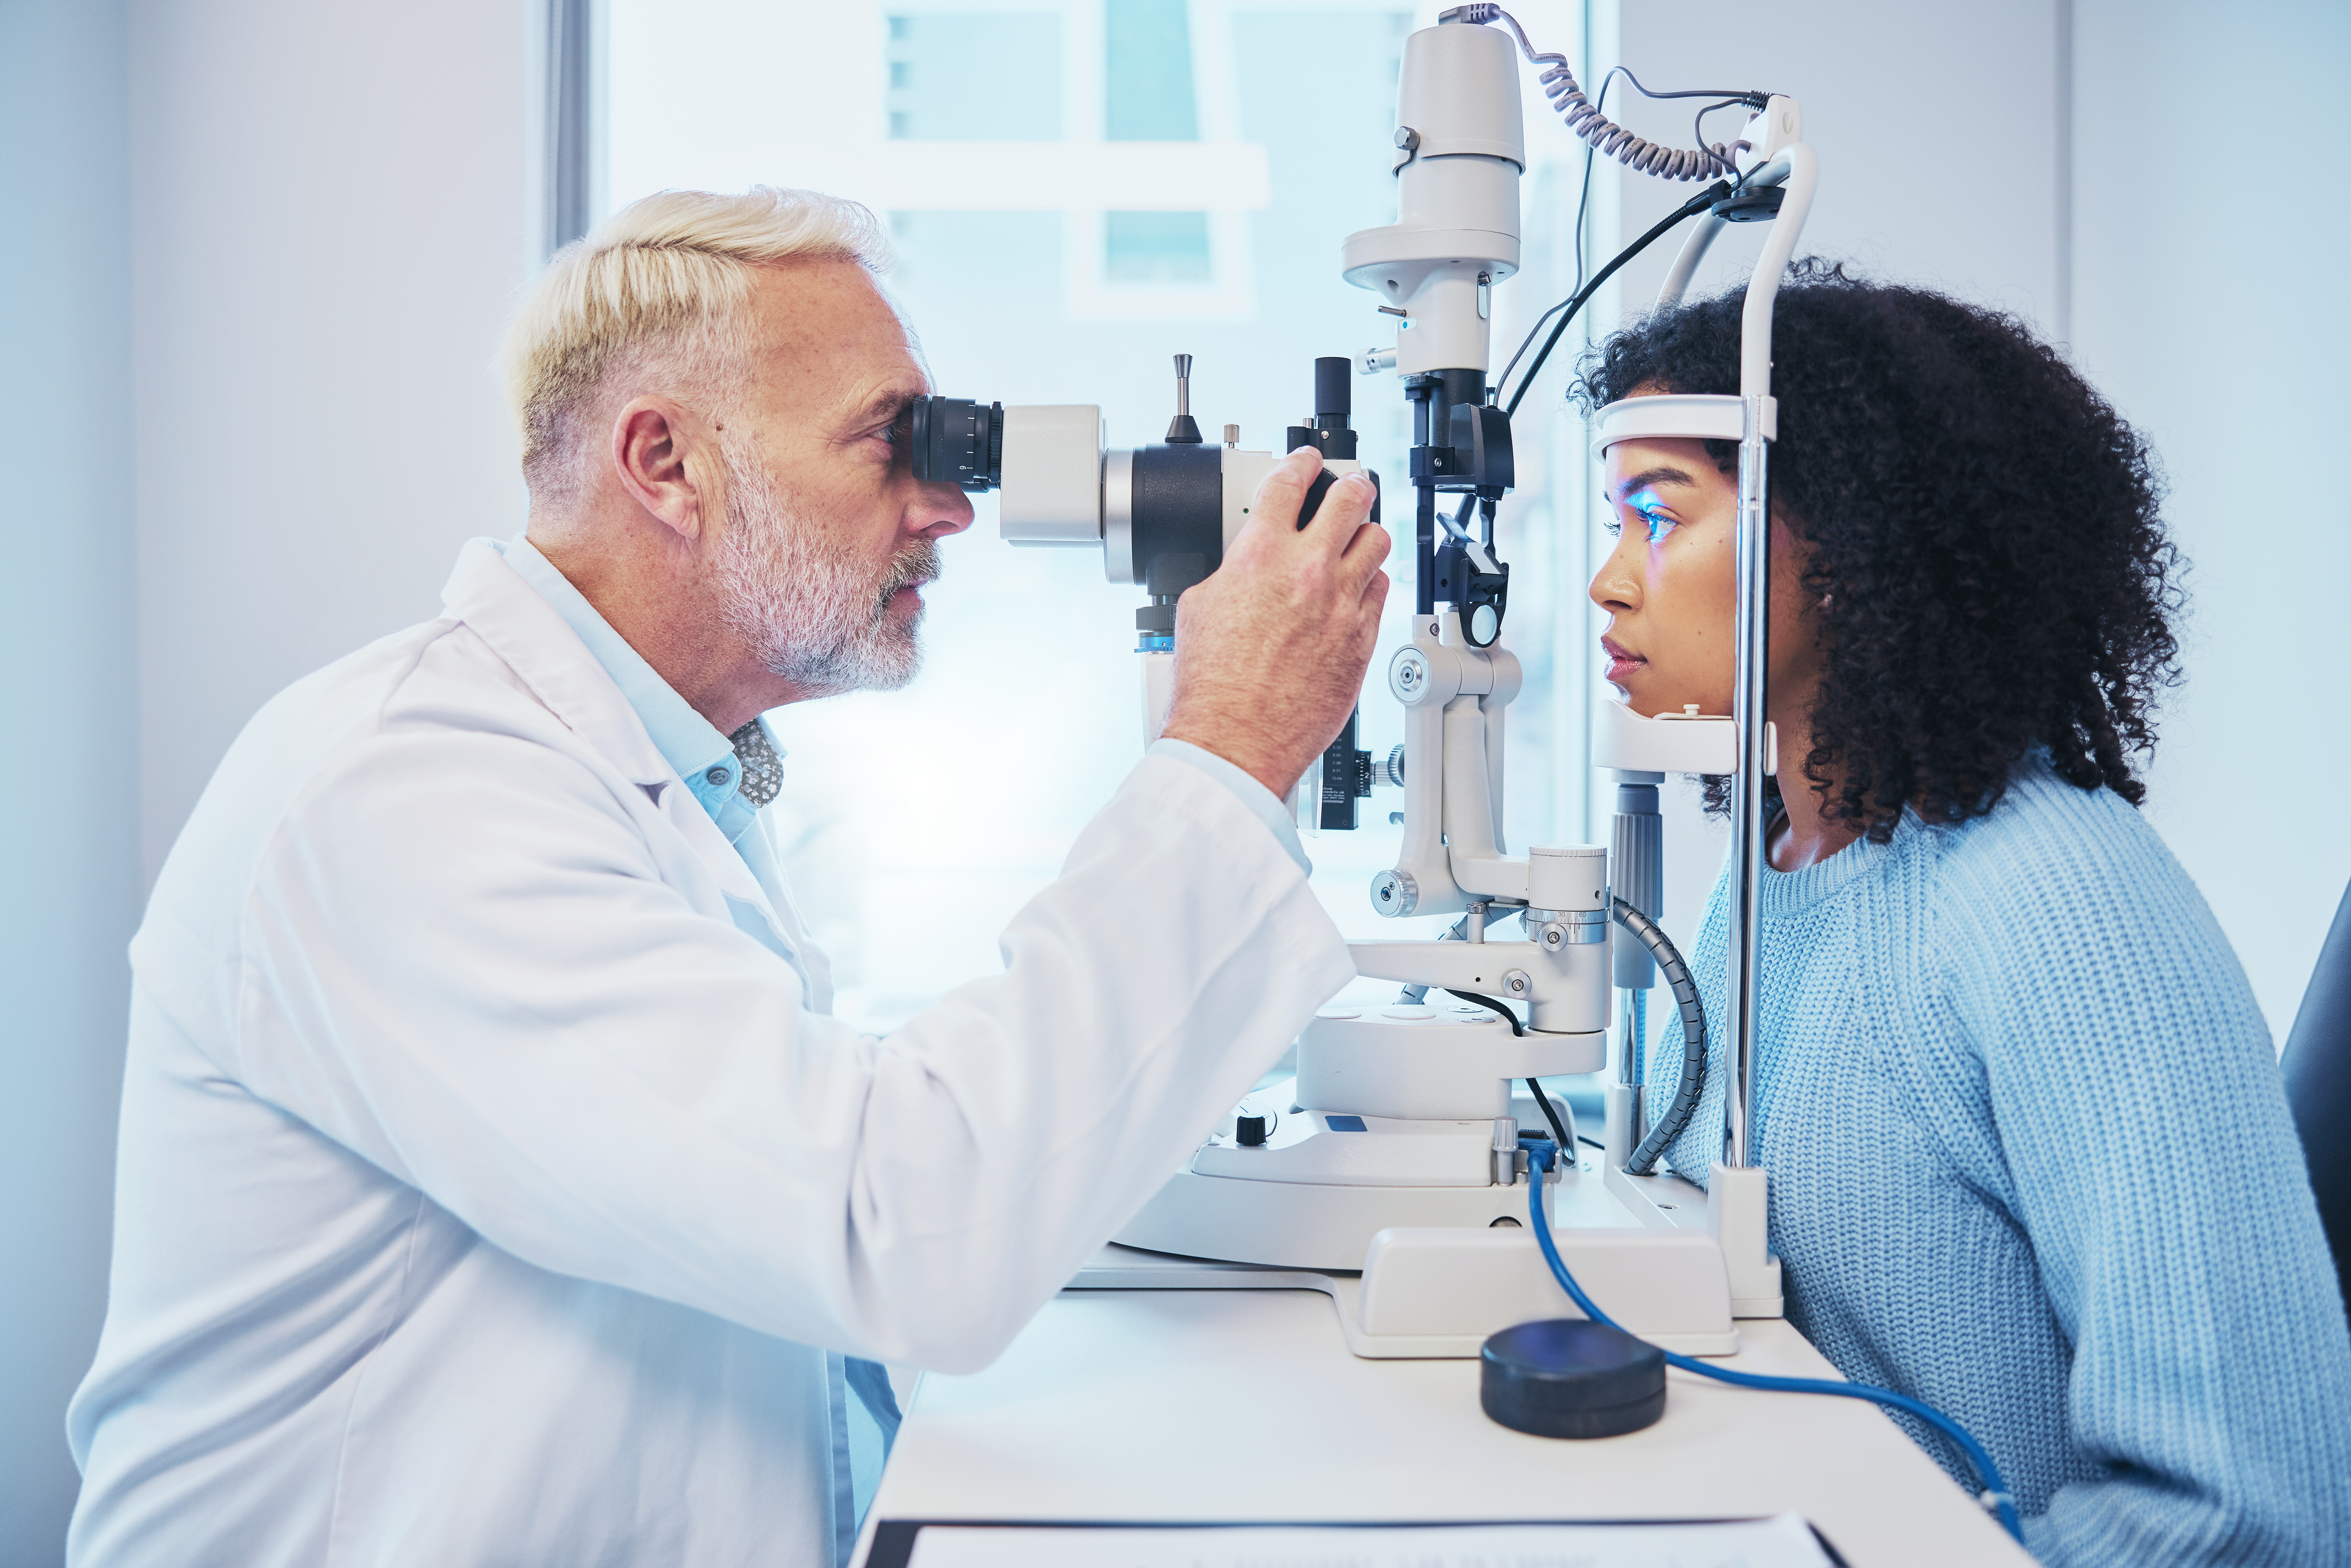 The impact of lack of government insured routine eye examinations on the incidence of self-reported glaucoma, cataracts and vision loss